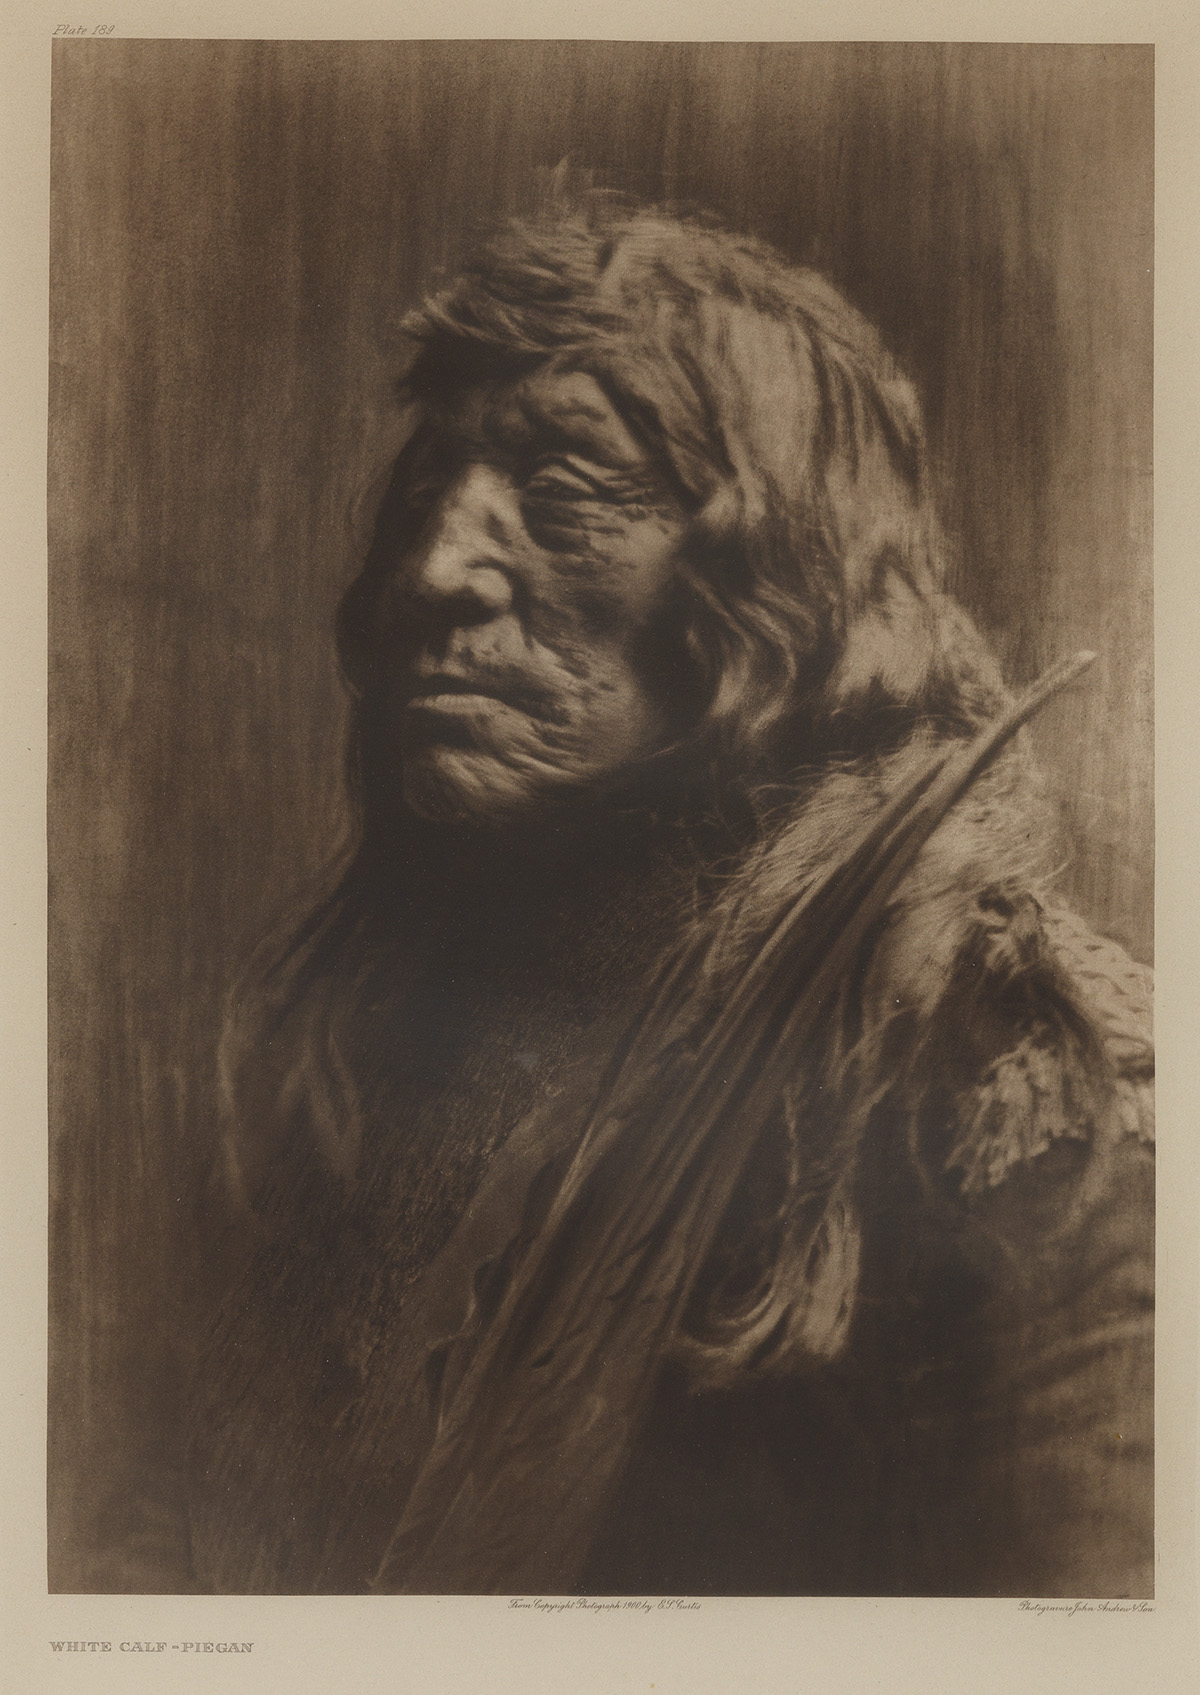 EDWARD S. CURTIS (1868-1952) Group of 6 large-format photogravures from The North American Indian, Portfolio VI.